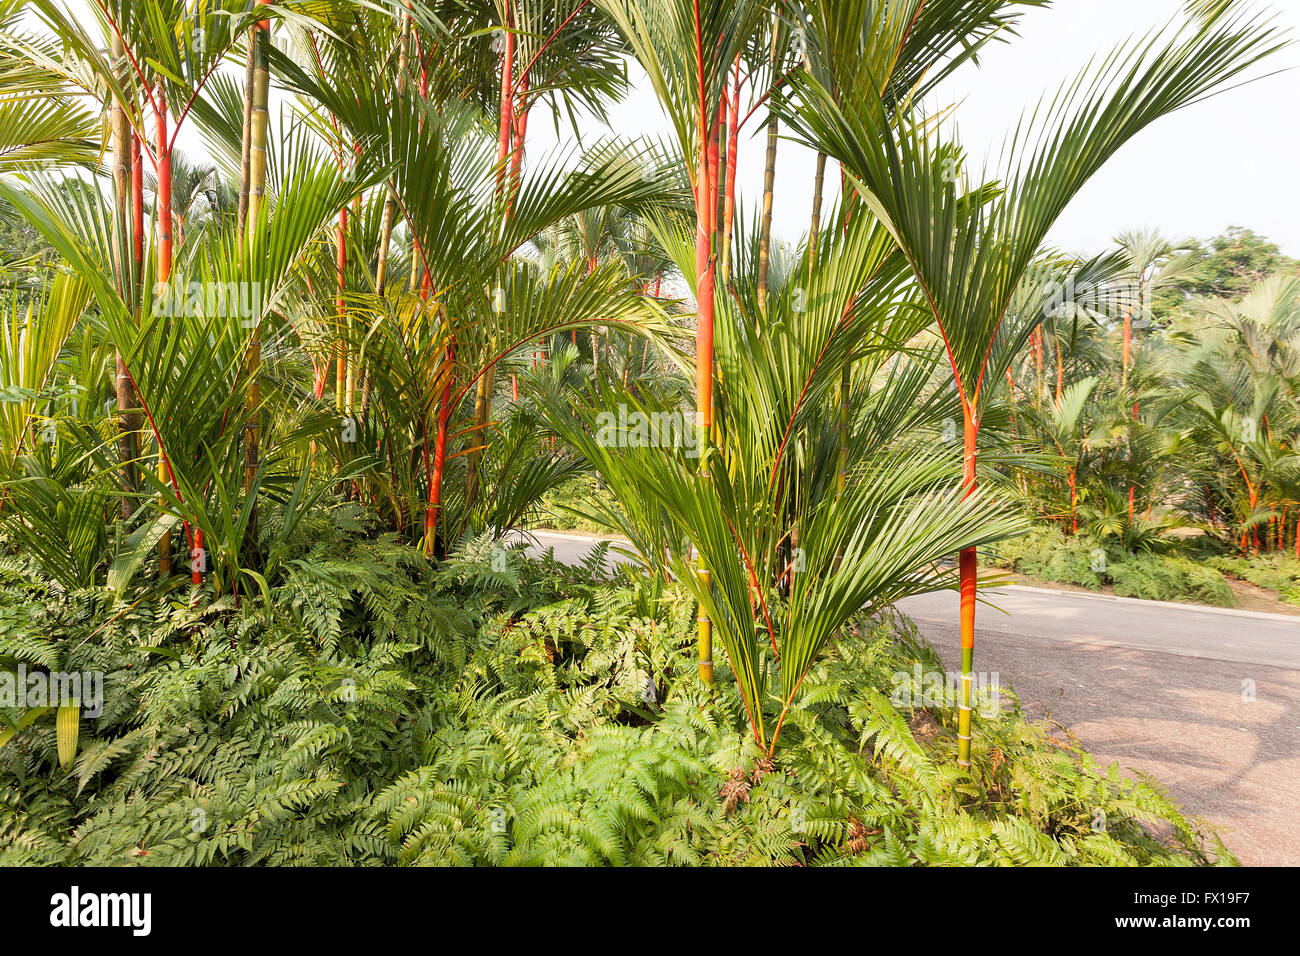 Red Lipstick Rajah Palm Trees growing over bed of Ferns at Botanical Garden Stock Photo